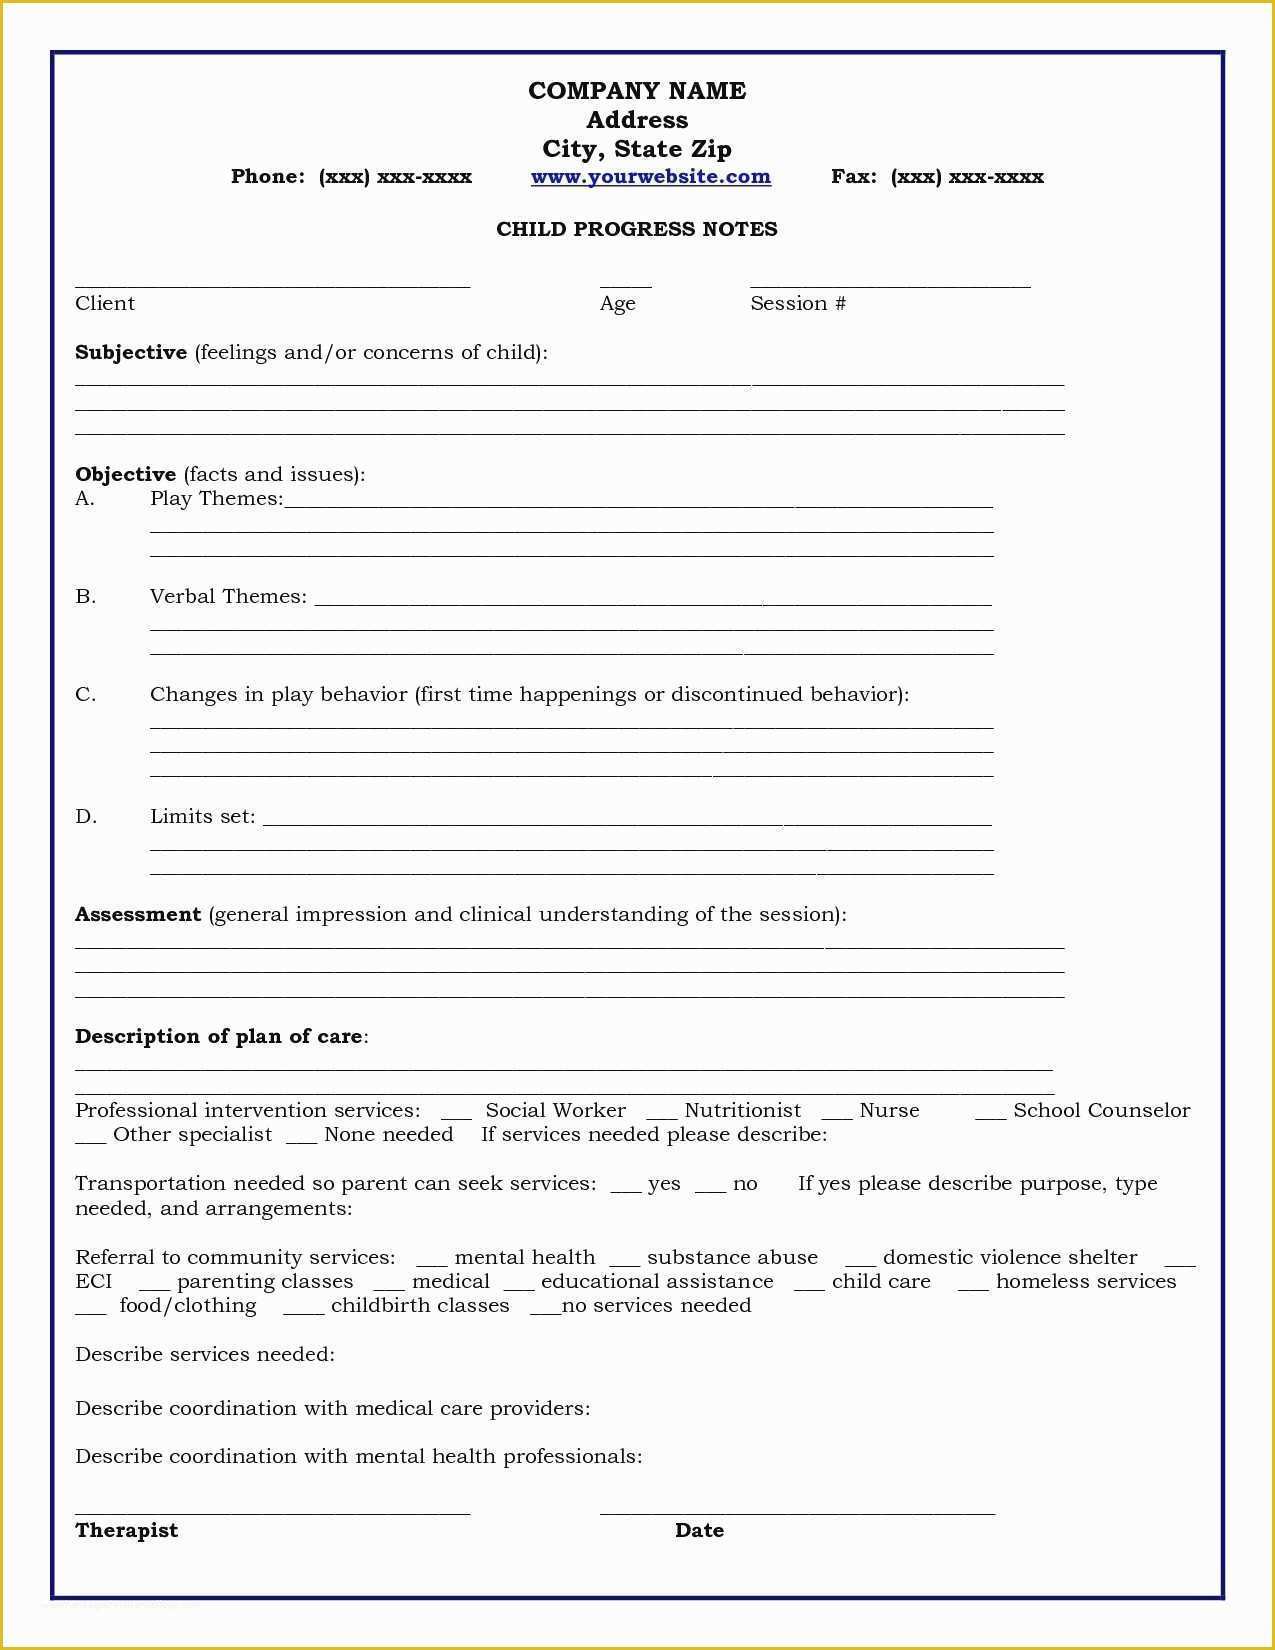 Free therapy Notes Template Of Free Counseling Progress Notes Template Best 25